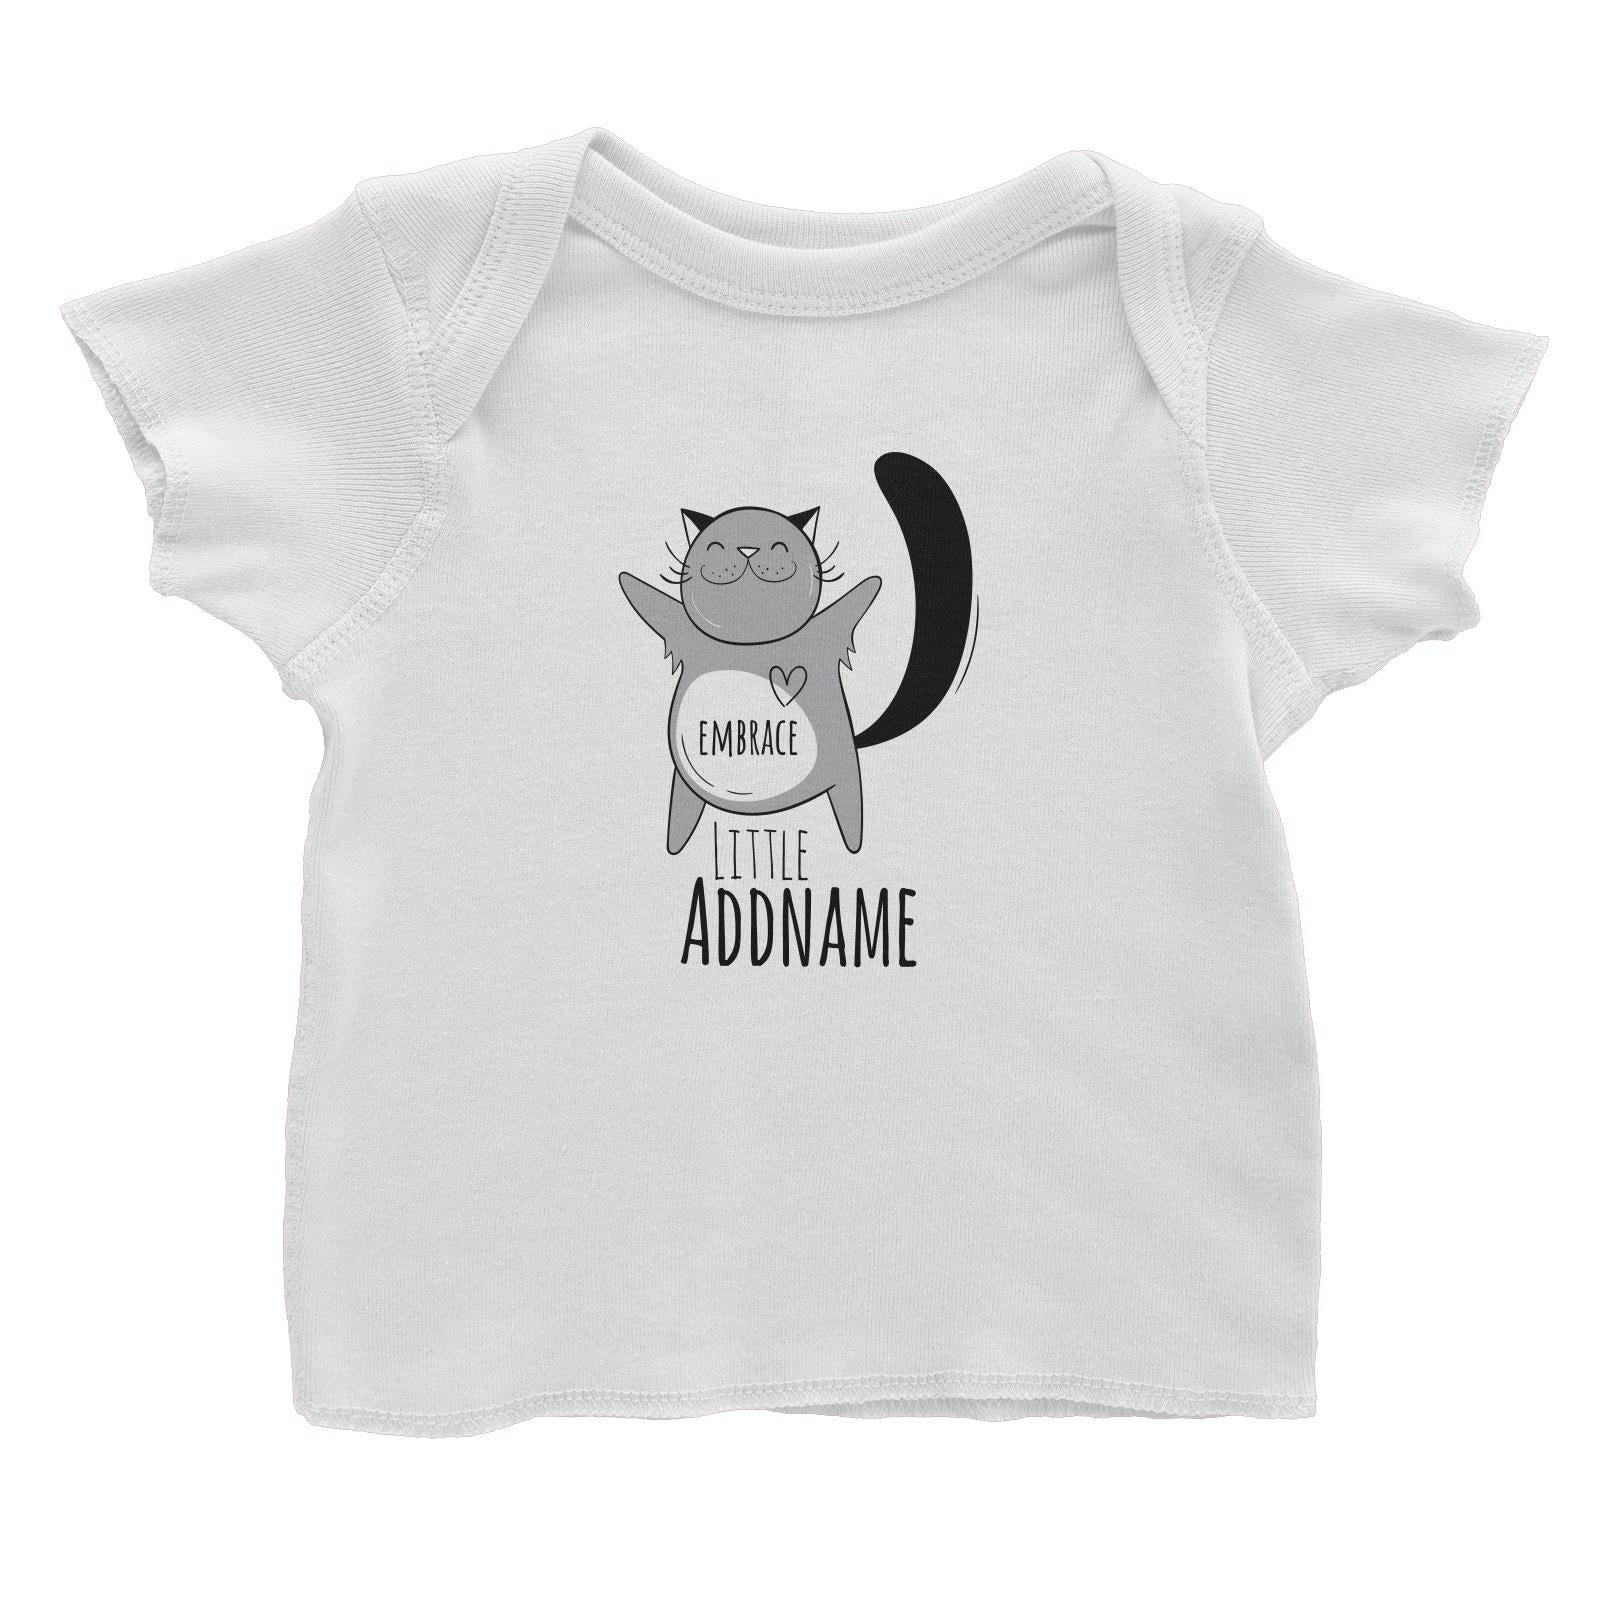 Drawn Adorable Animals Embrace Addname Baby T-Shirt